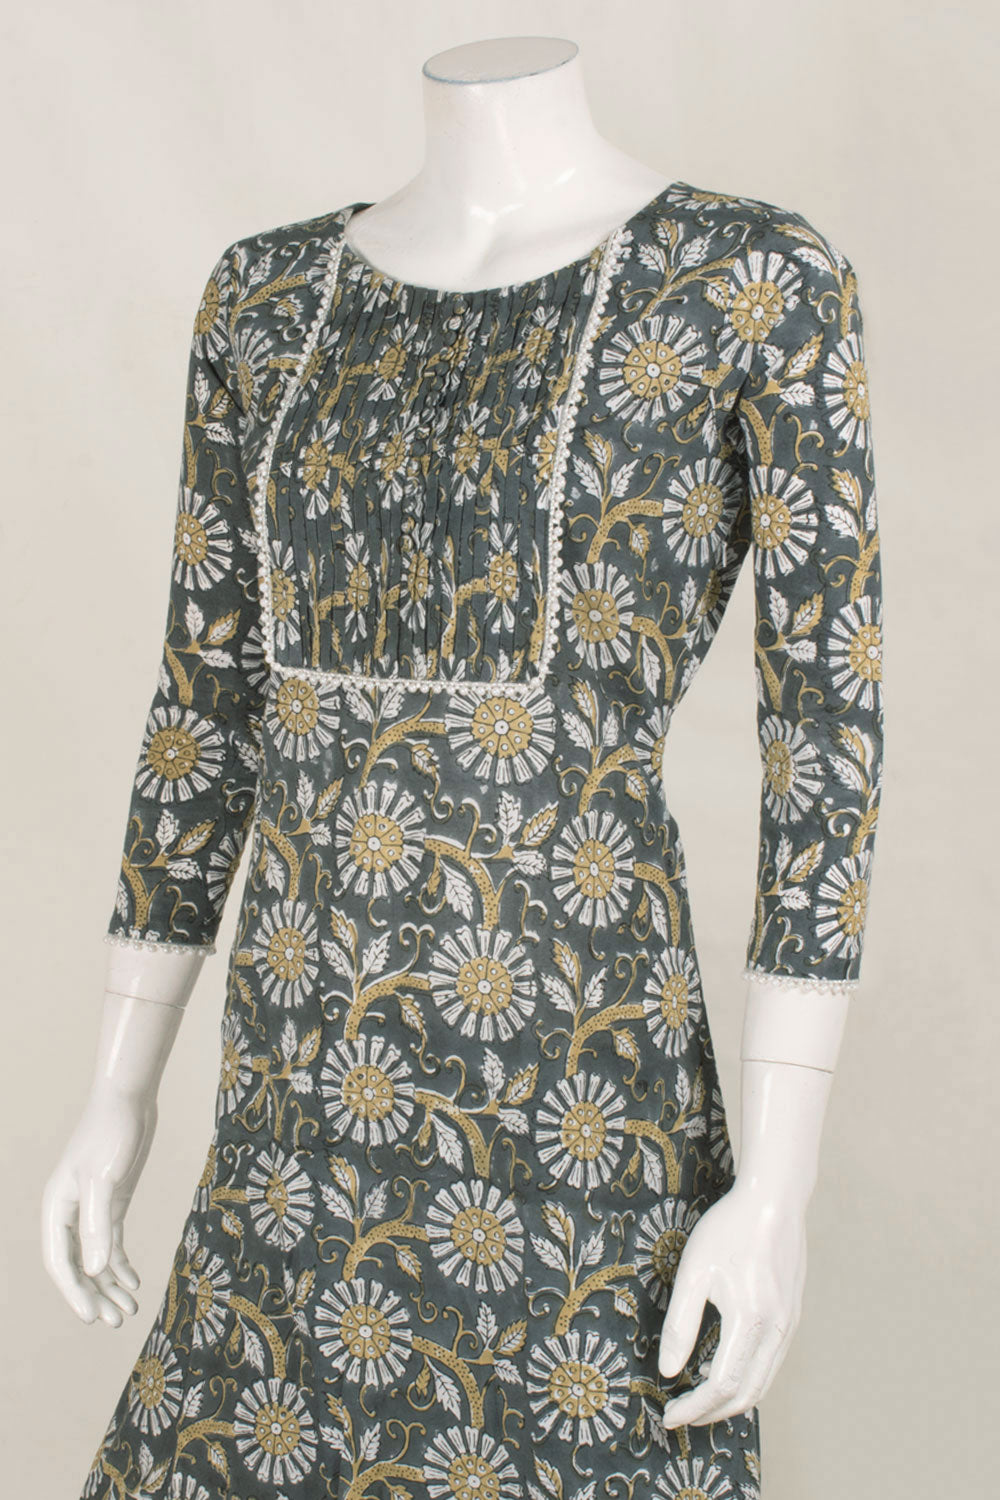 Hand Block Printed Cotton Dress with Pin tuck, Bead Work Yoke and Side Zip